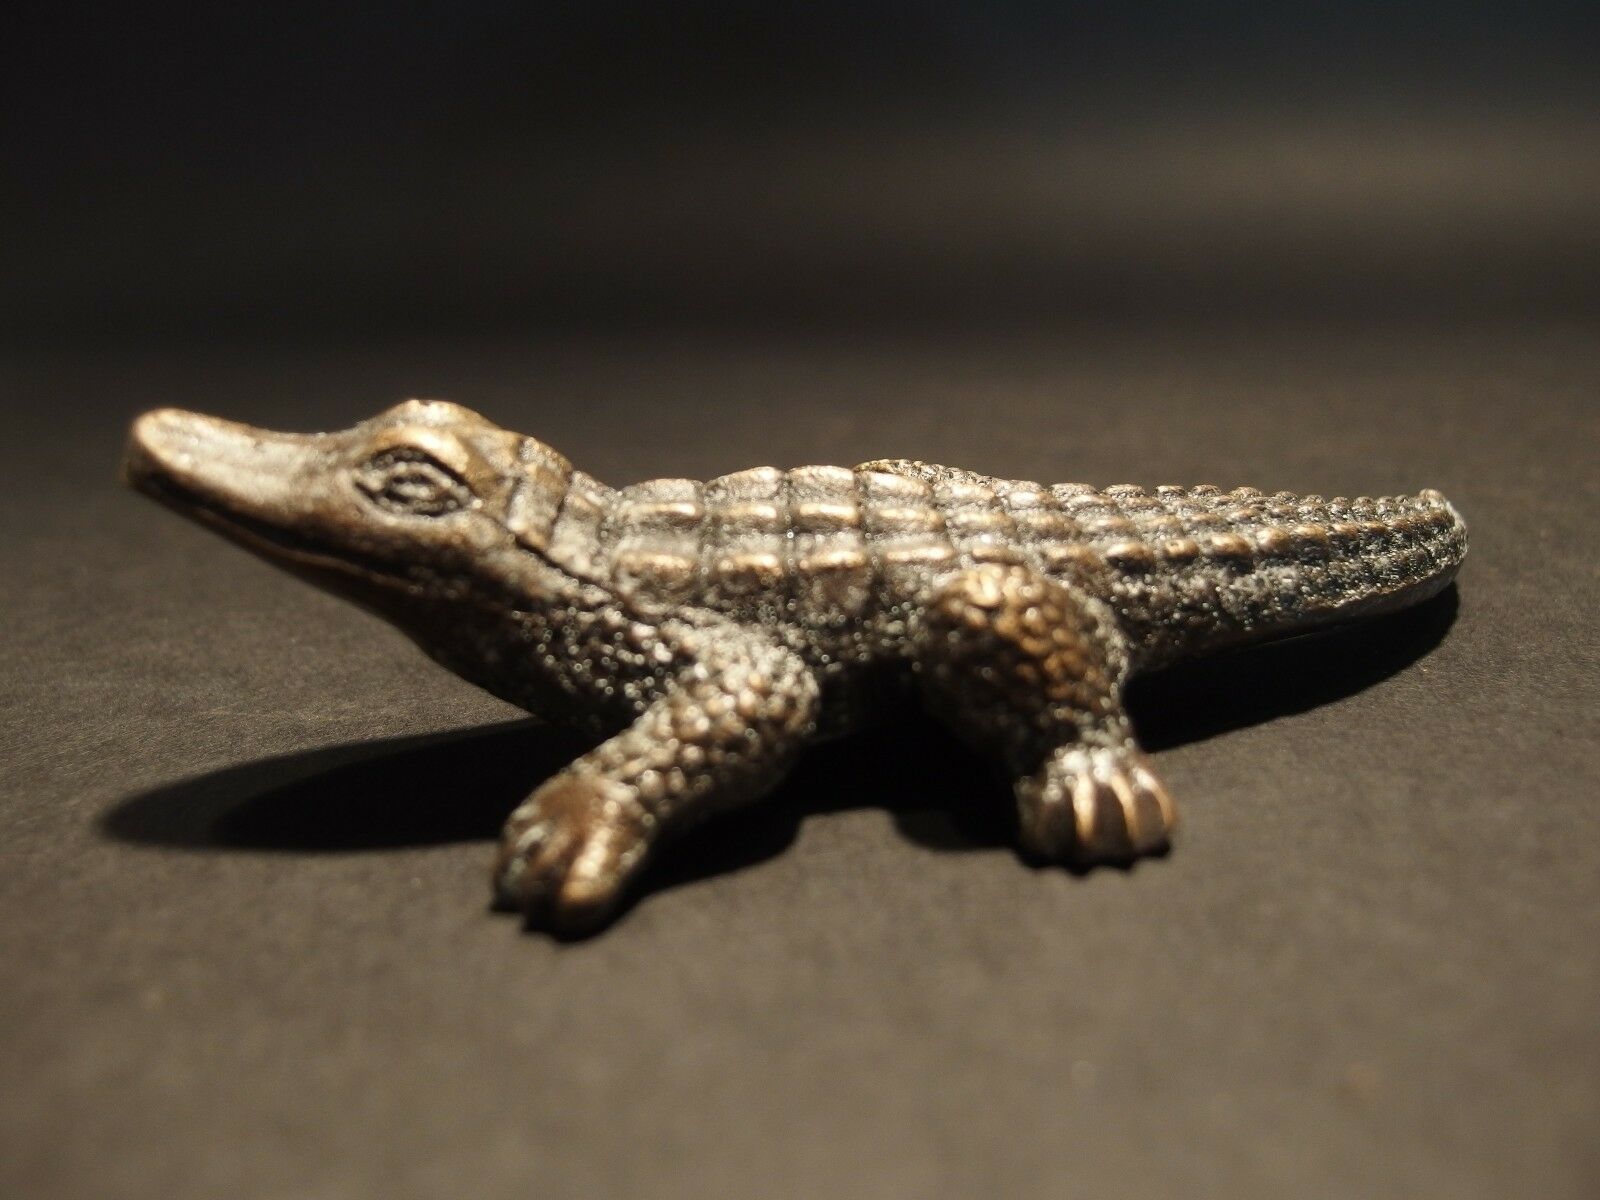 5" Vintage Antique Style Brass Gator Alligator Paperweight Desk Figure - Early Home Decor